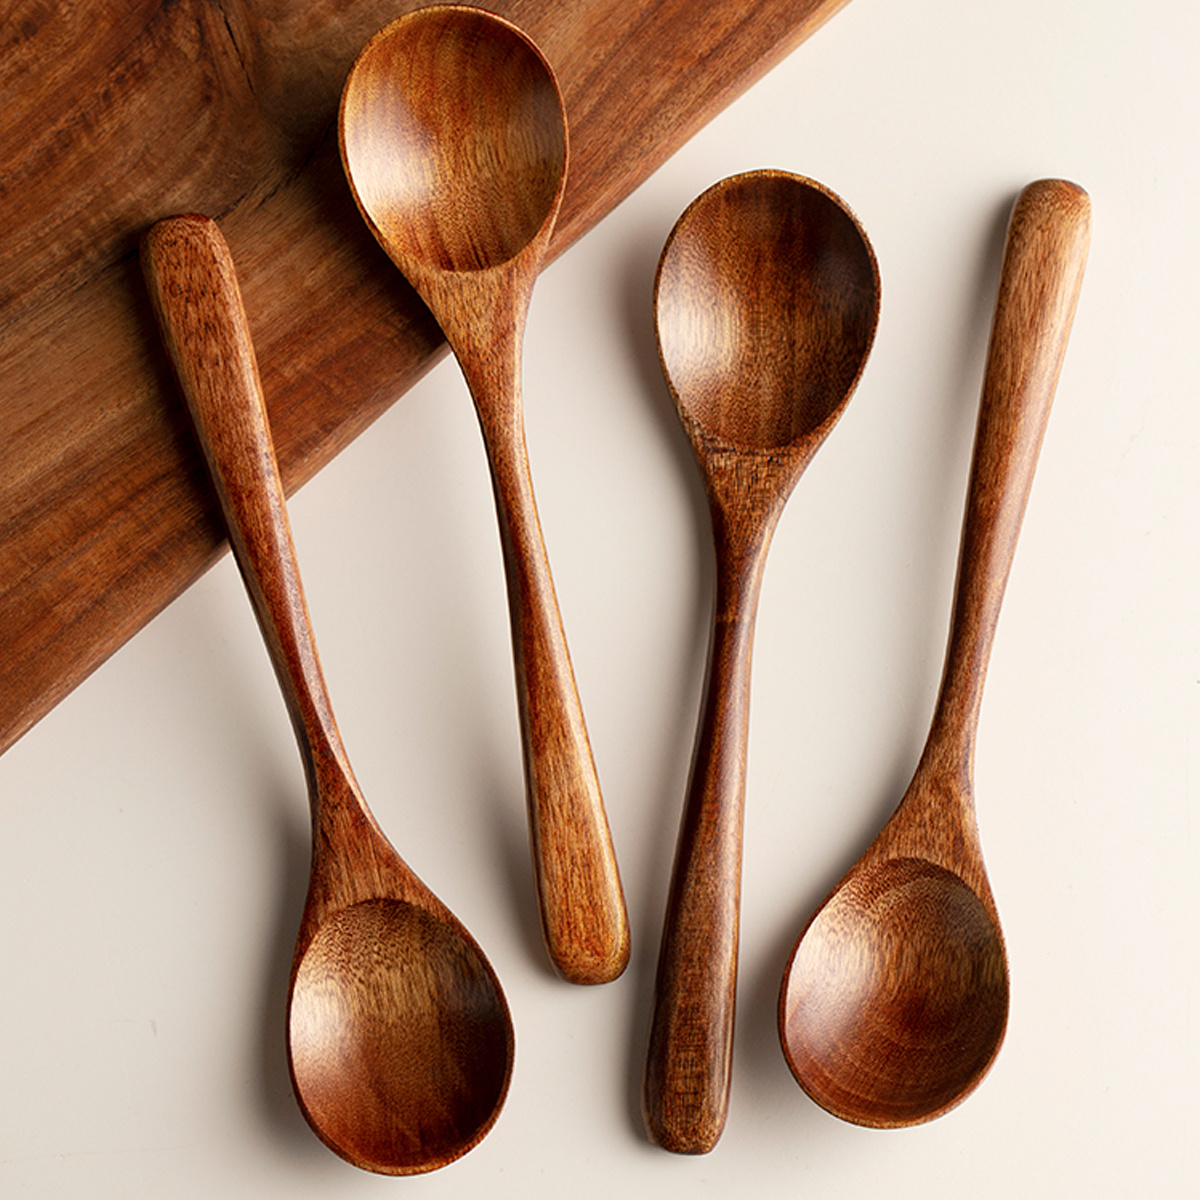 

Add A Touch Of Elegance To Your Kitchen With This Handcrafted Delicate Wooden Vintage Spoon